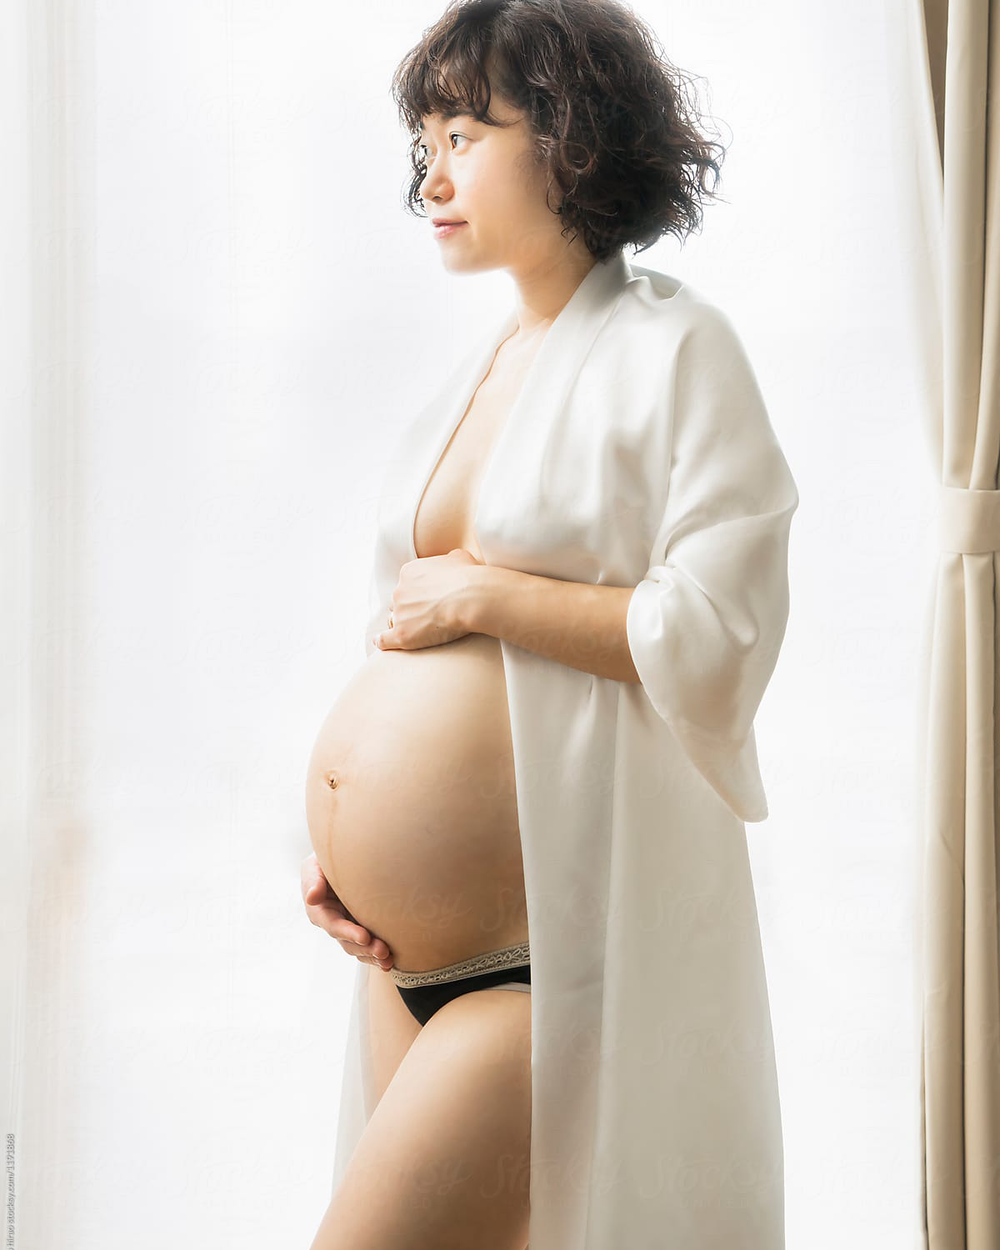 3 Tips to Nourish Your Body During Pregnancy